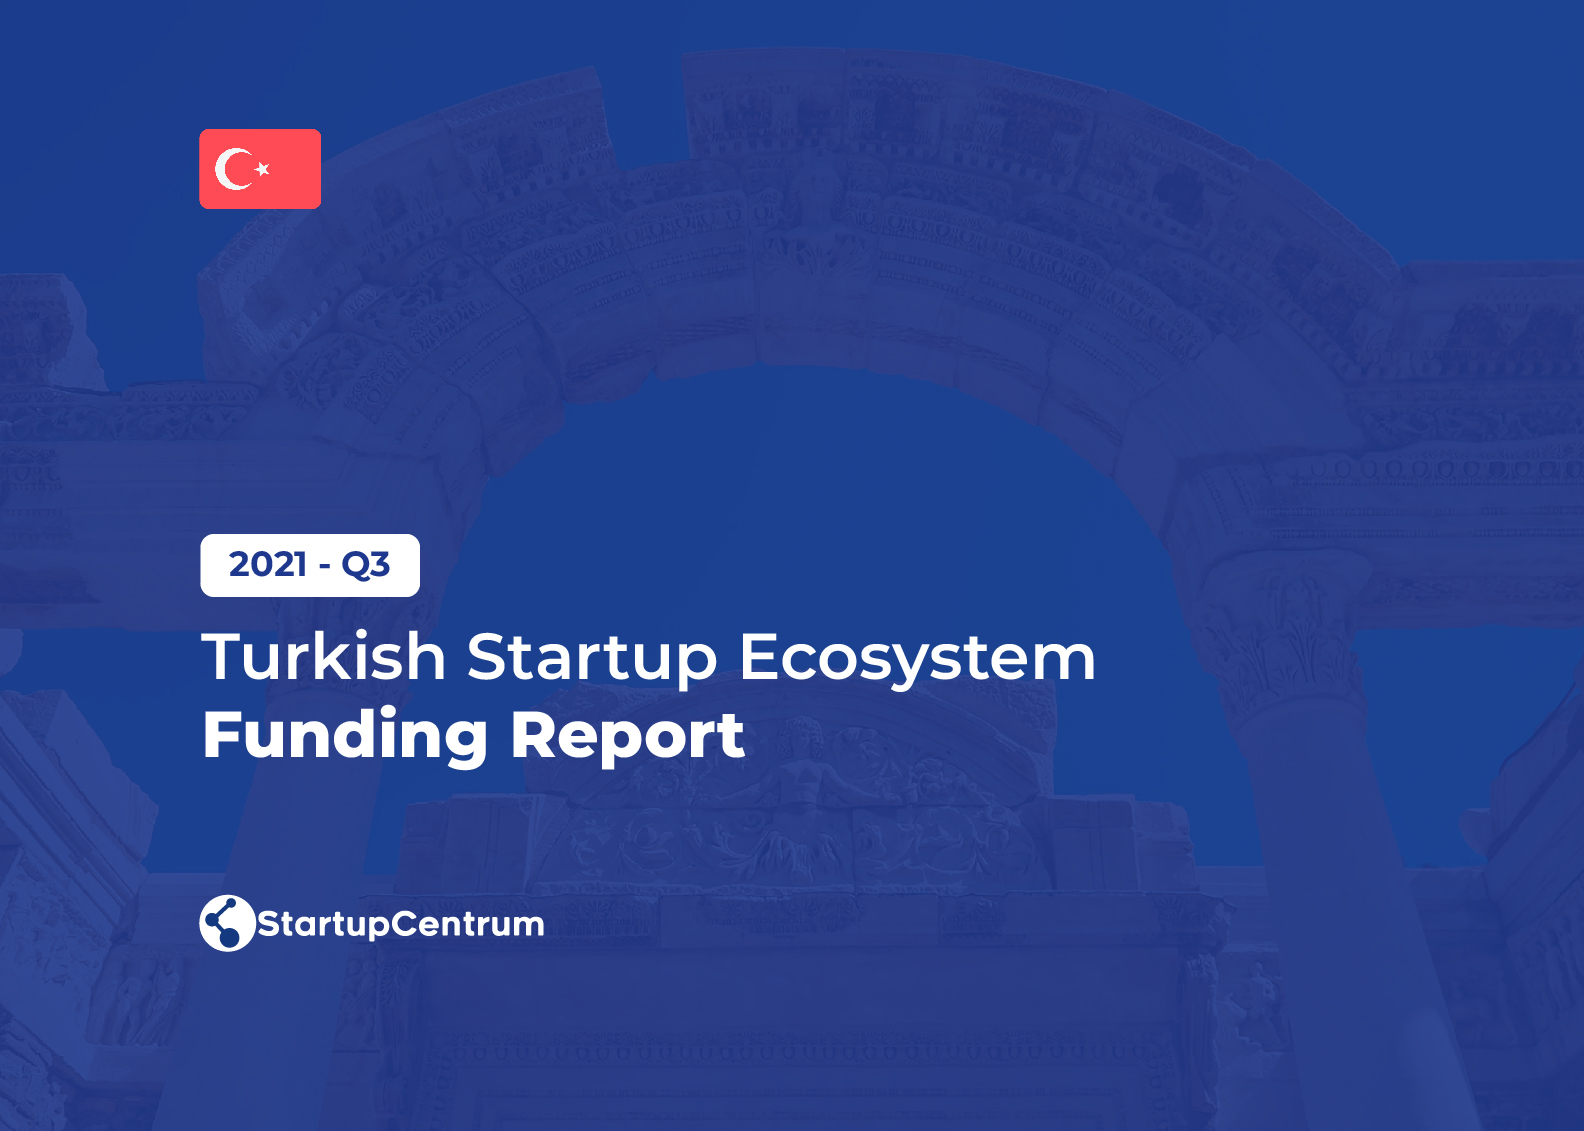 2021 - Q3 Turkish Startup Ecosystem Funding Report Cover Image